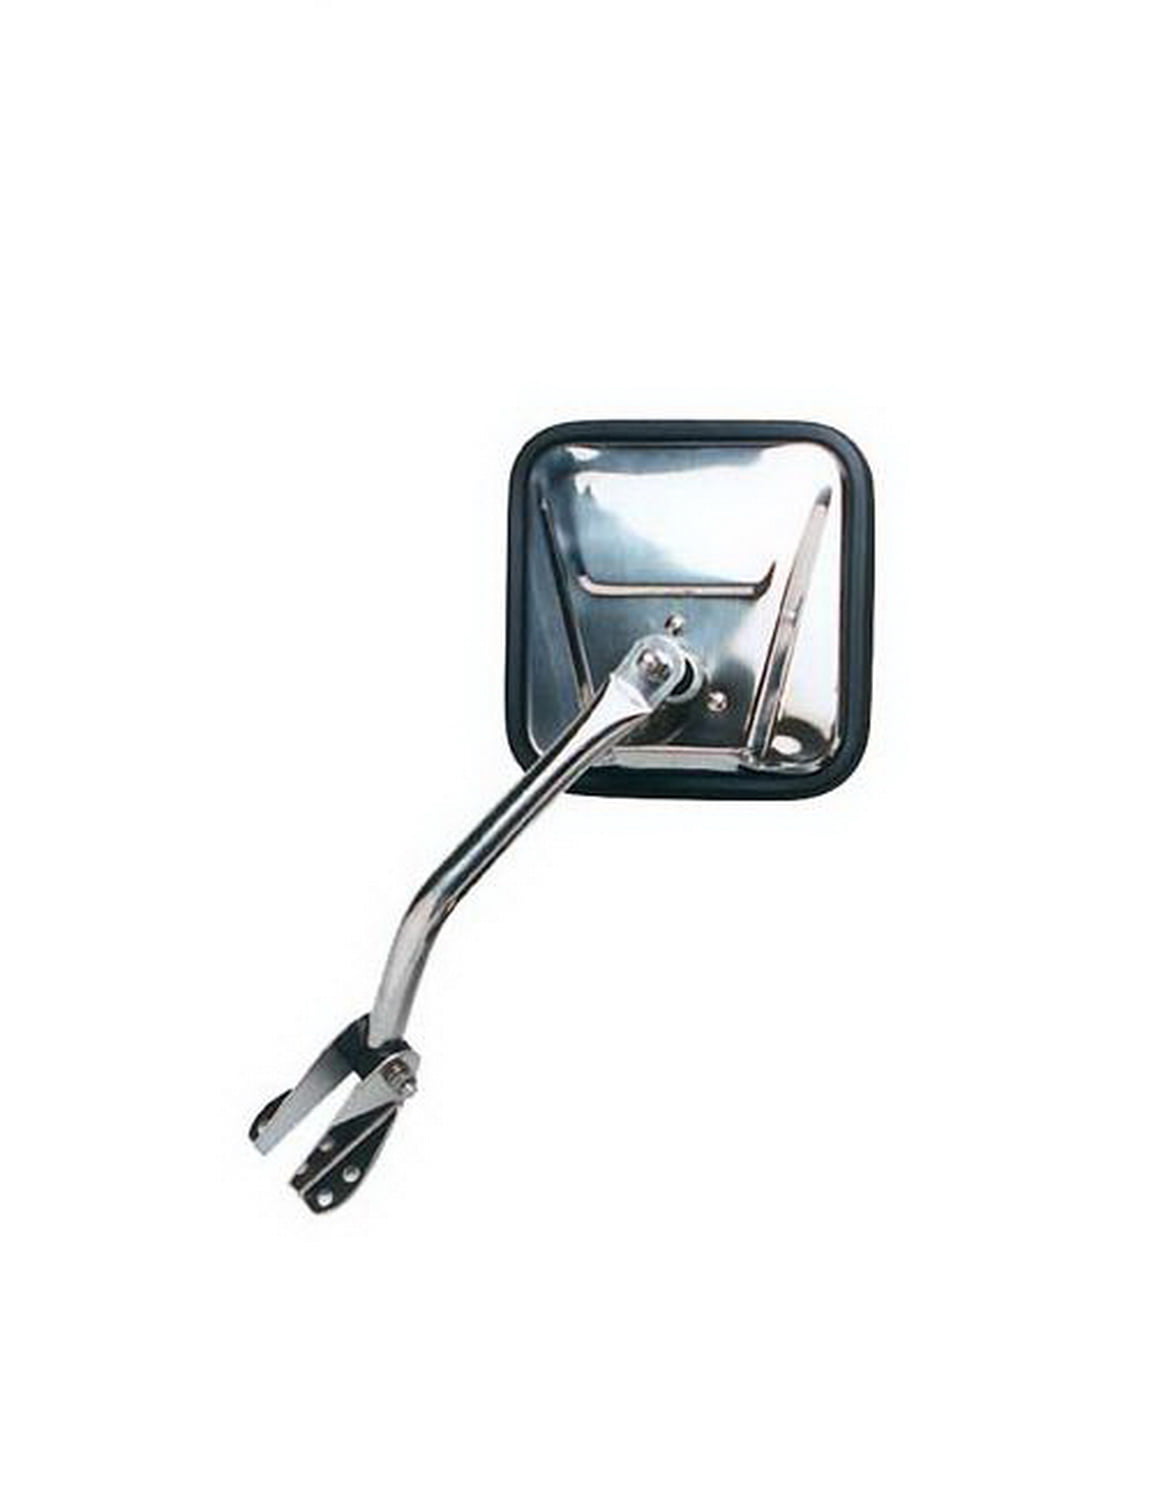 Original Style Replacement Mirror Jeep Driver Side Manual Non-Heated Stainless